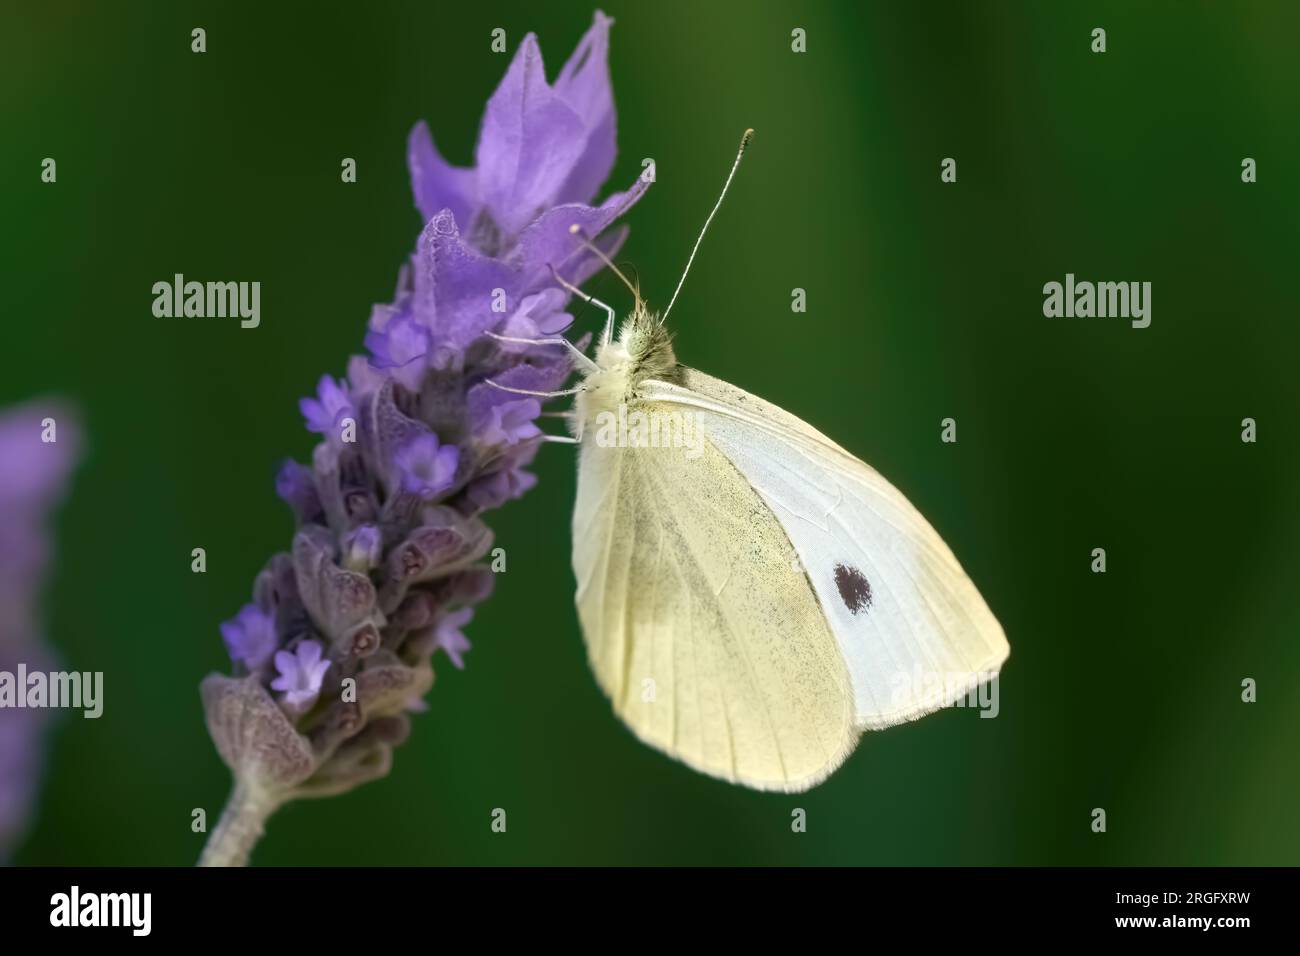 Cabbage white butterfly (Pieris rapae) close-up on a purple lavender flower Stock Photo